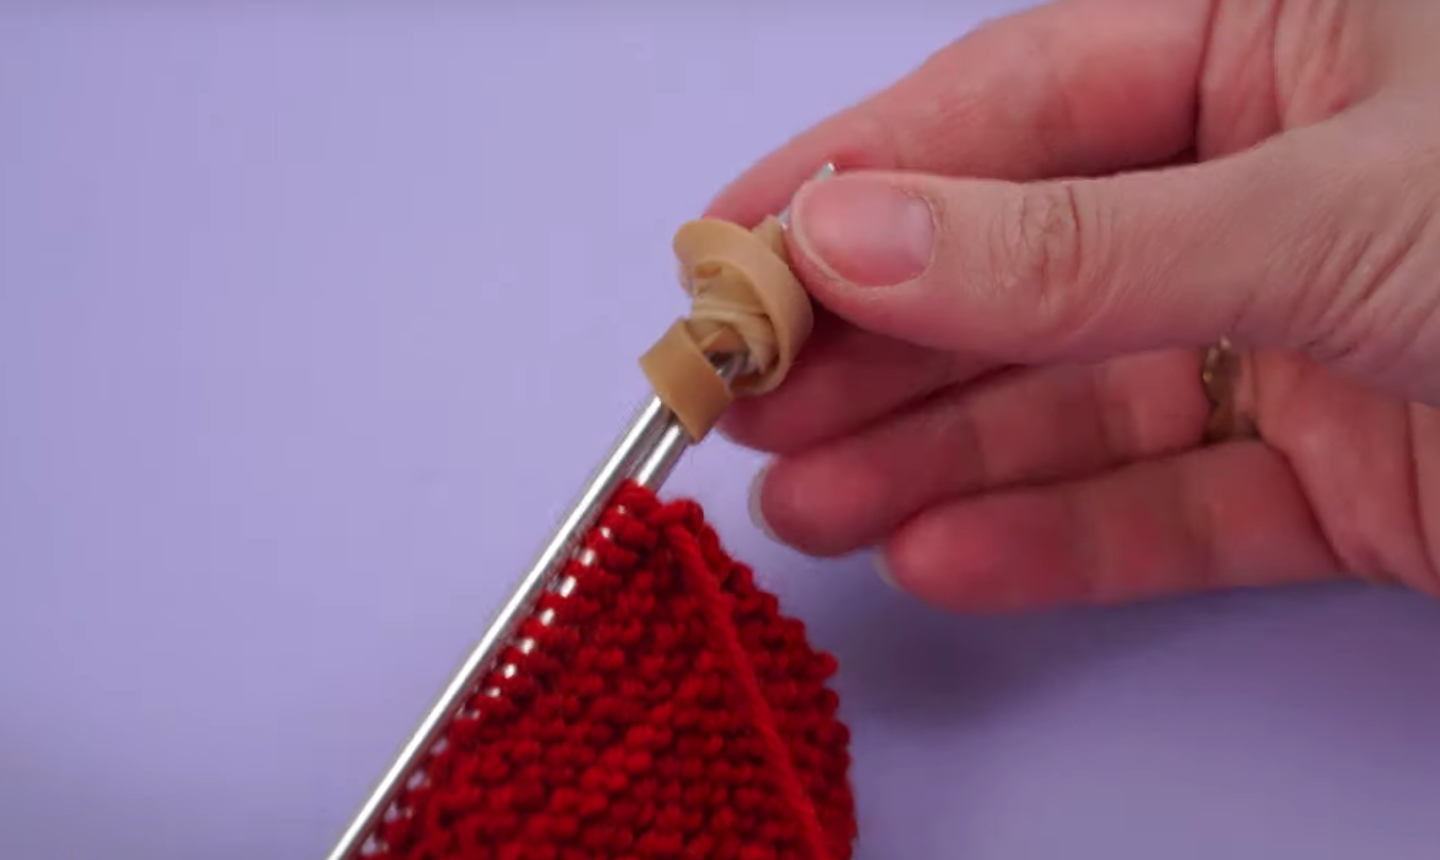 rubber bands on knitting